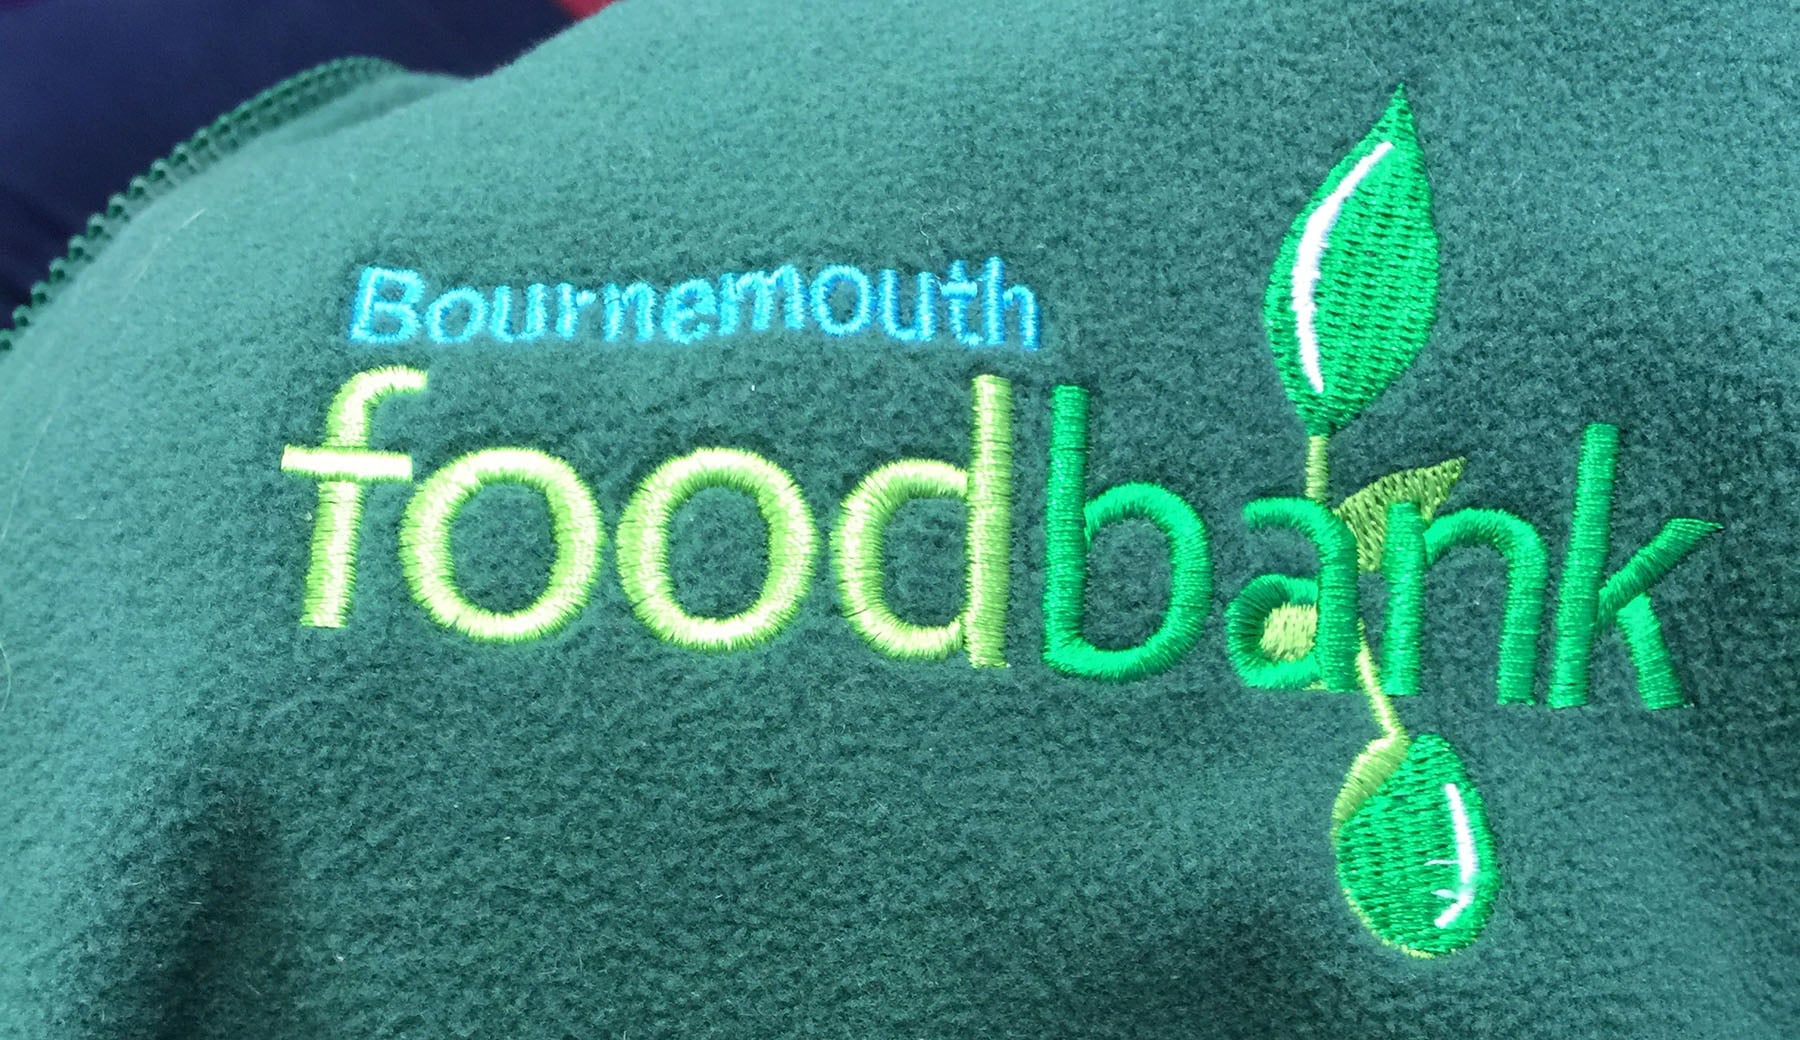 Bournemouth Foodbank National Donation Collection